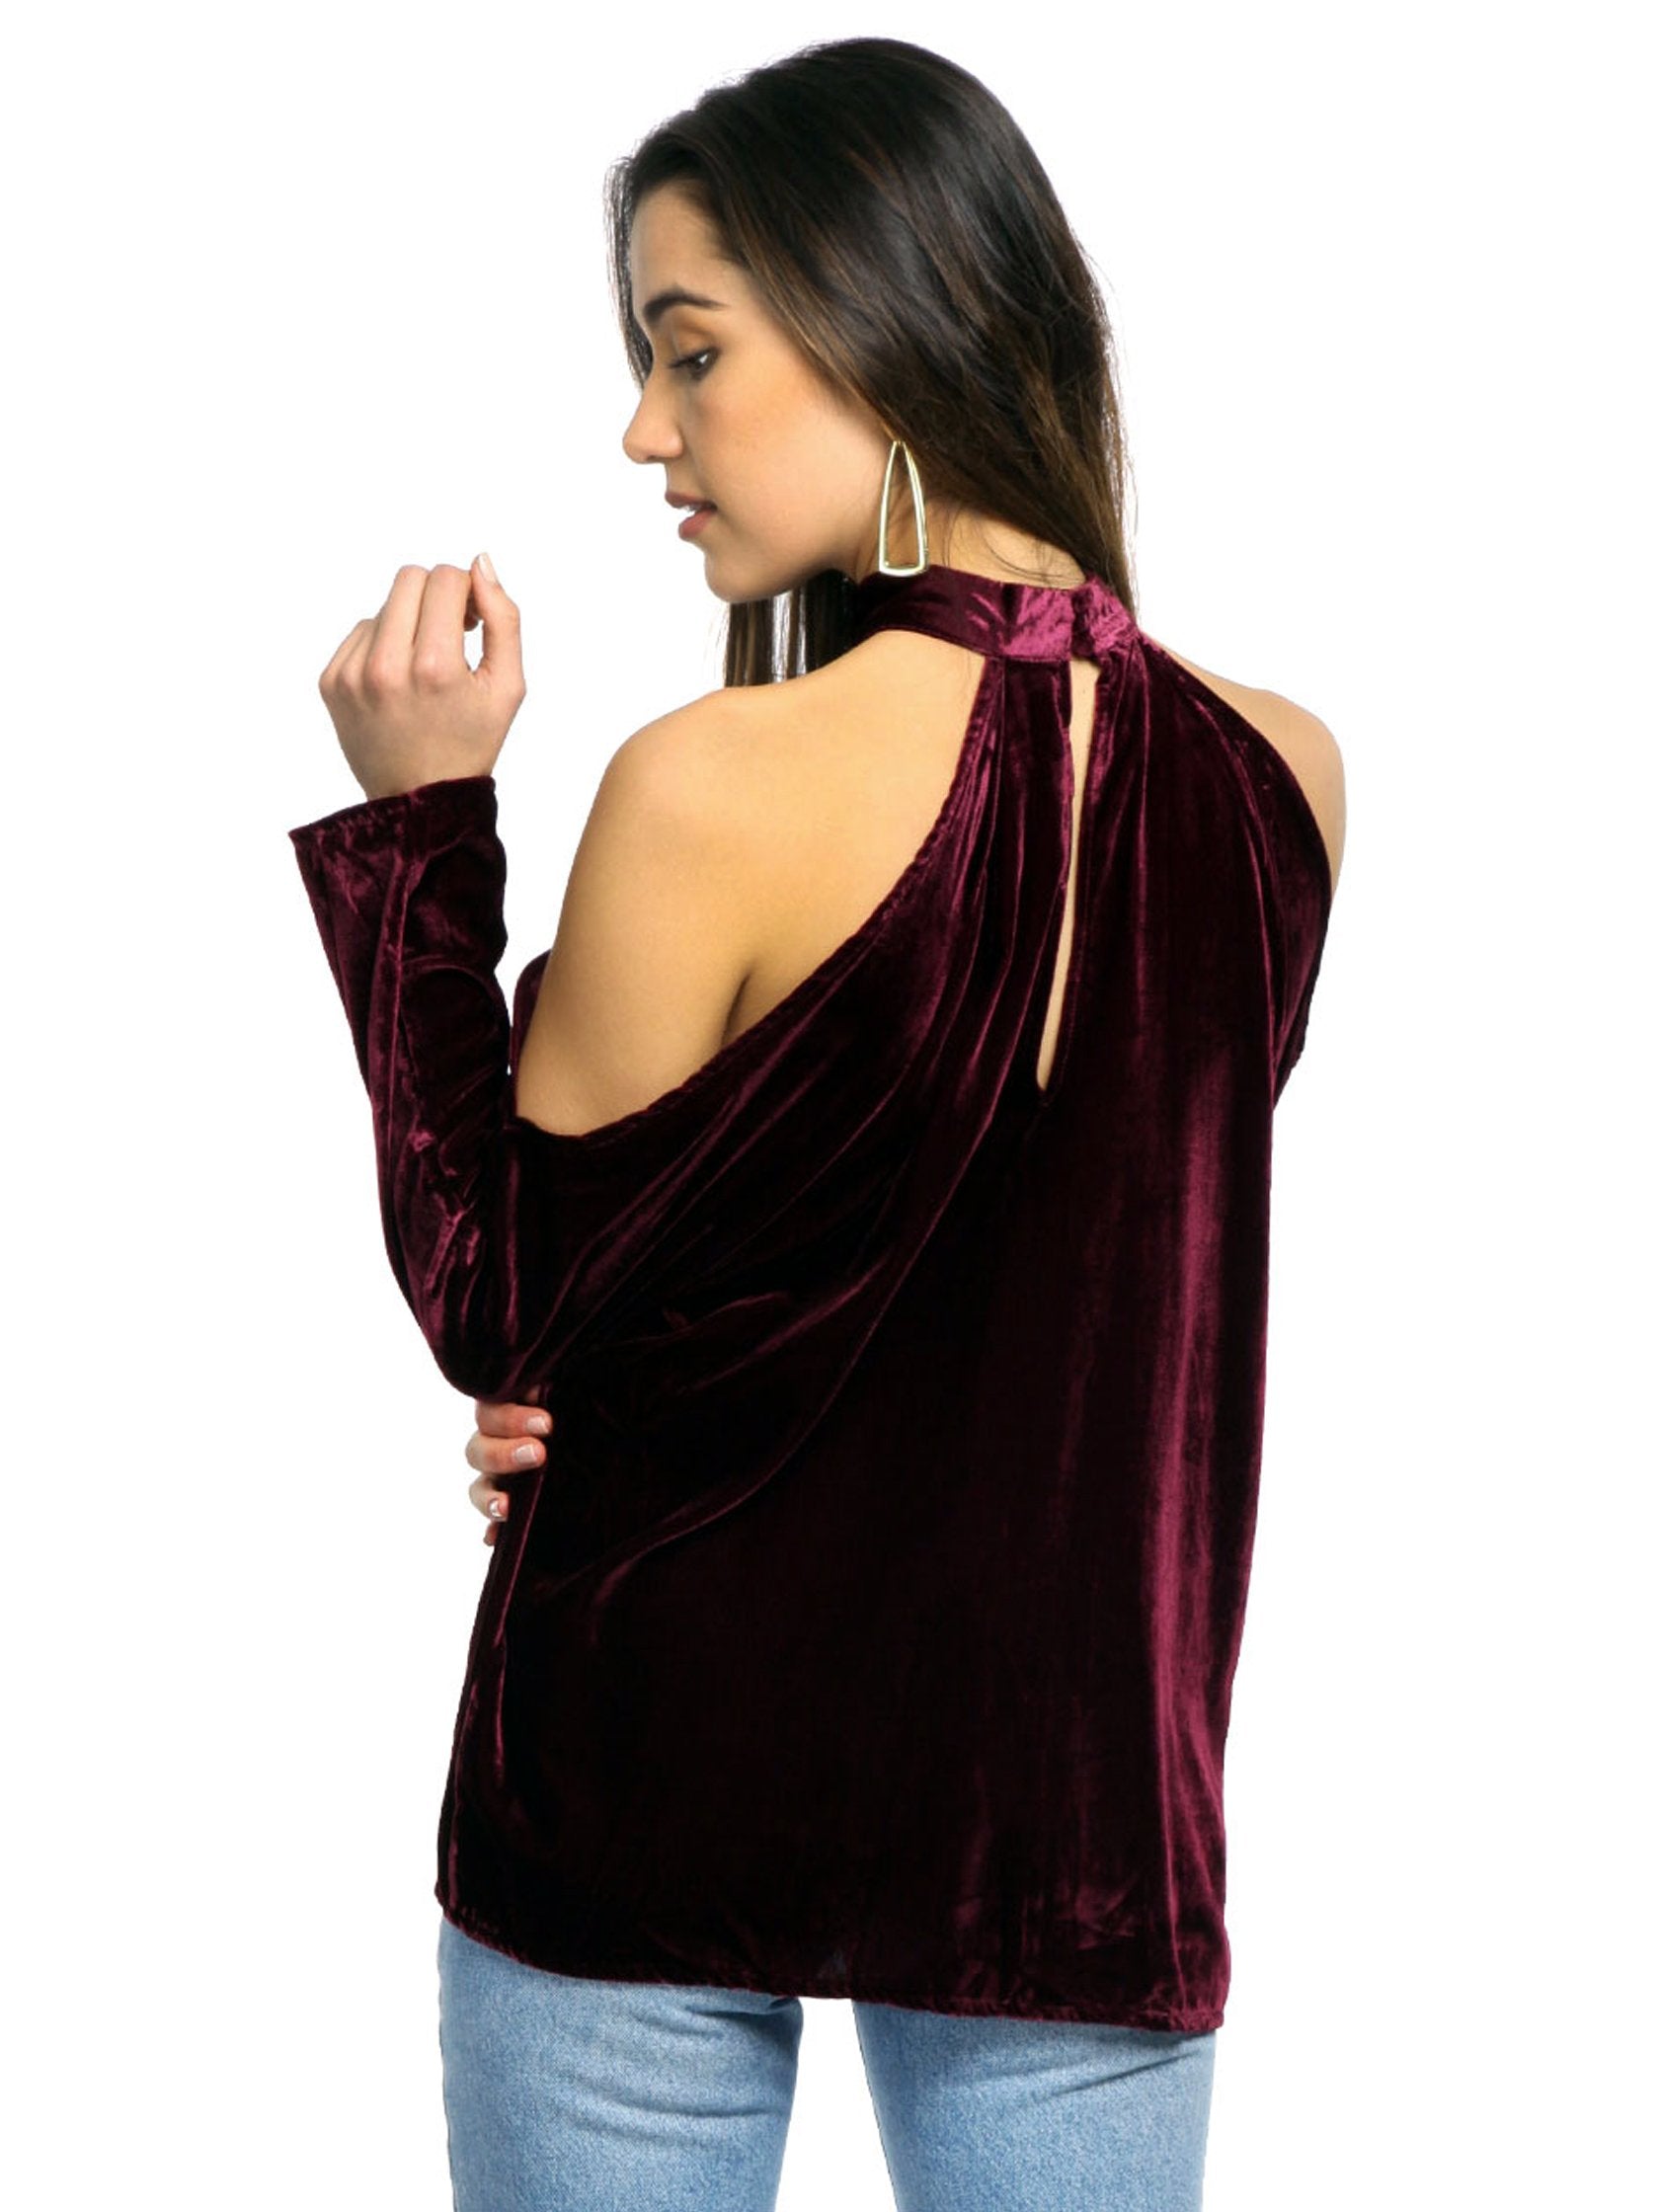 Women outfit in a top rental from YUMI KIM called Hot And Cold Velvet Top